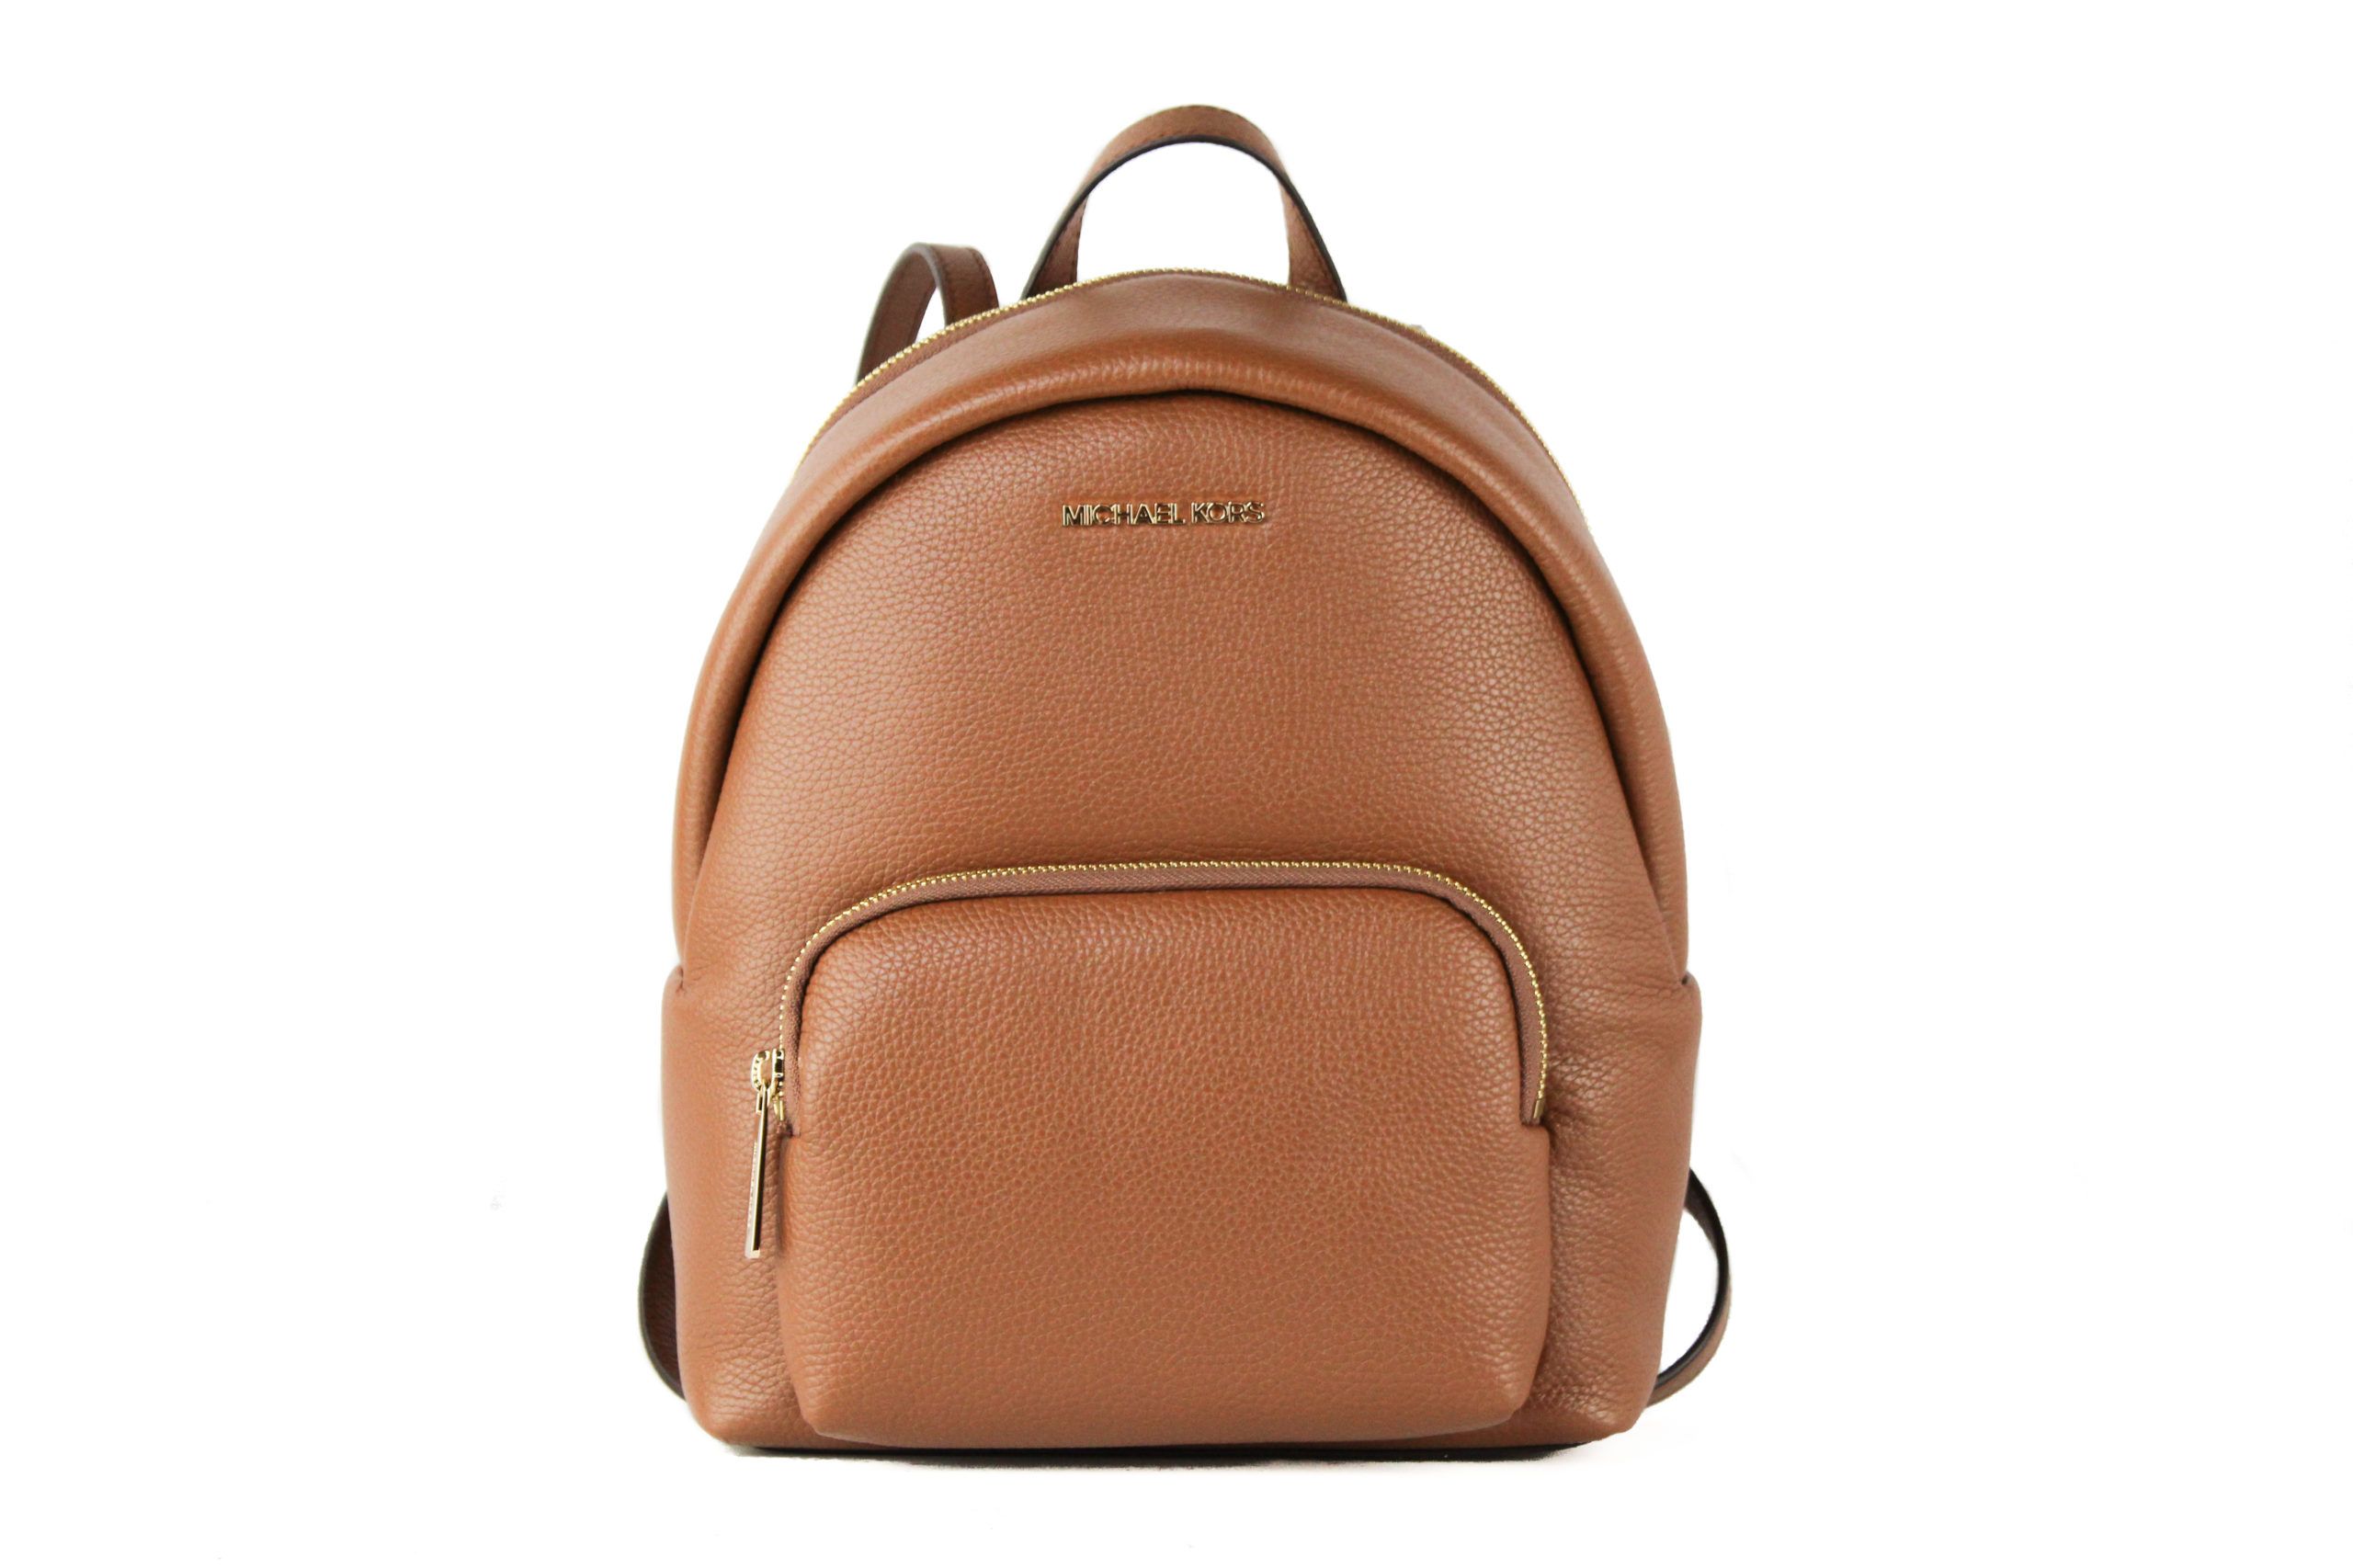 Brand New with Tags attached (100% Authentic). 
Style:. Michael Kors Erin Medium Leather Convertible Backpack (Luggage)
Material: PebbleLeather. 
Features: Inner Pockets, Exterior Zip Pocket, Adjustable/Convertible Straps. 
Measures: 26.67 cmL x 31.75 cm H x 12.7 cm D.